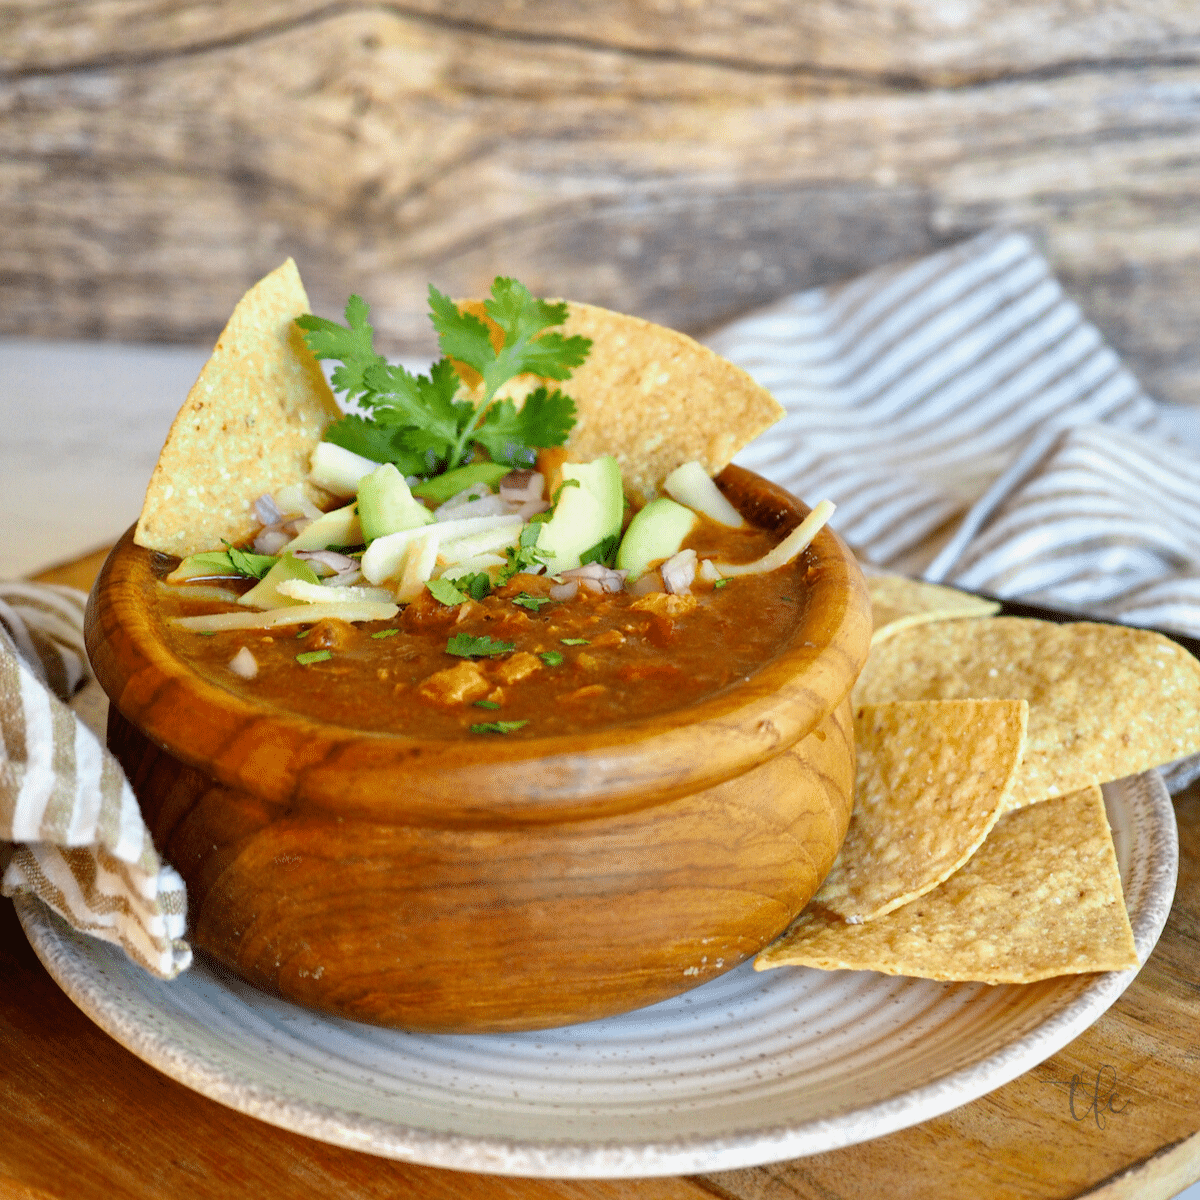 Colorado Green Chili verde in a wooden bowl garnished with tortilla chips, cheese, avocados and cilantro.